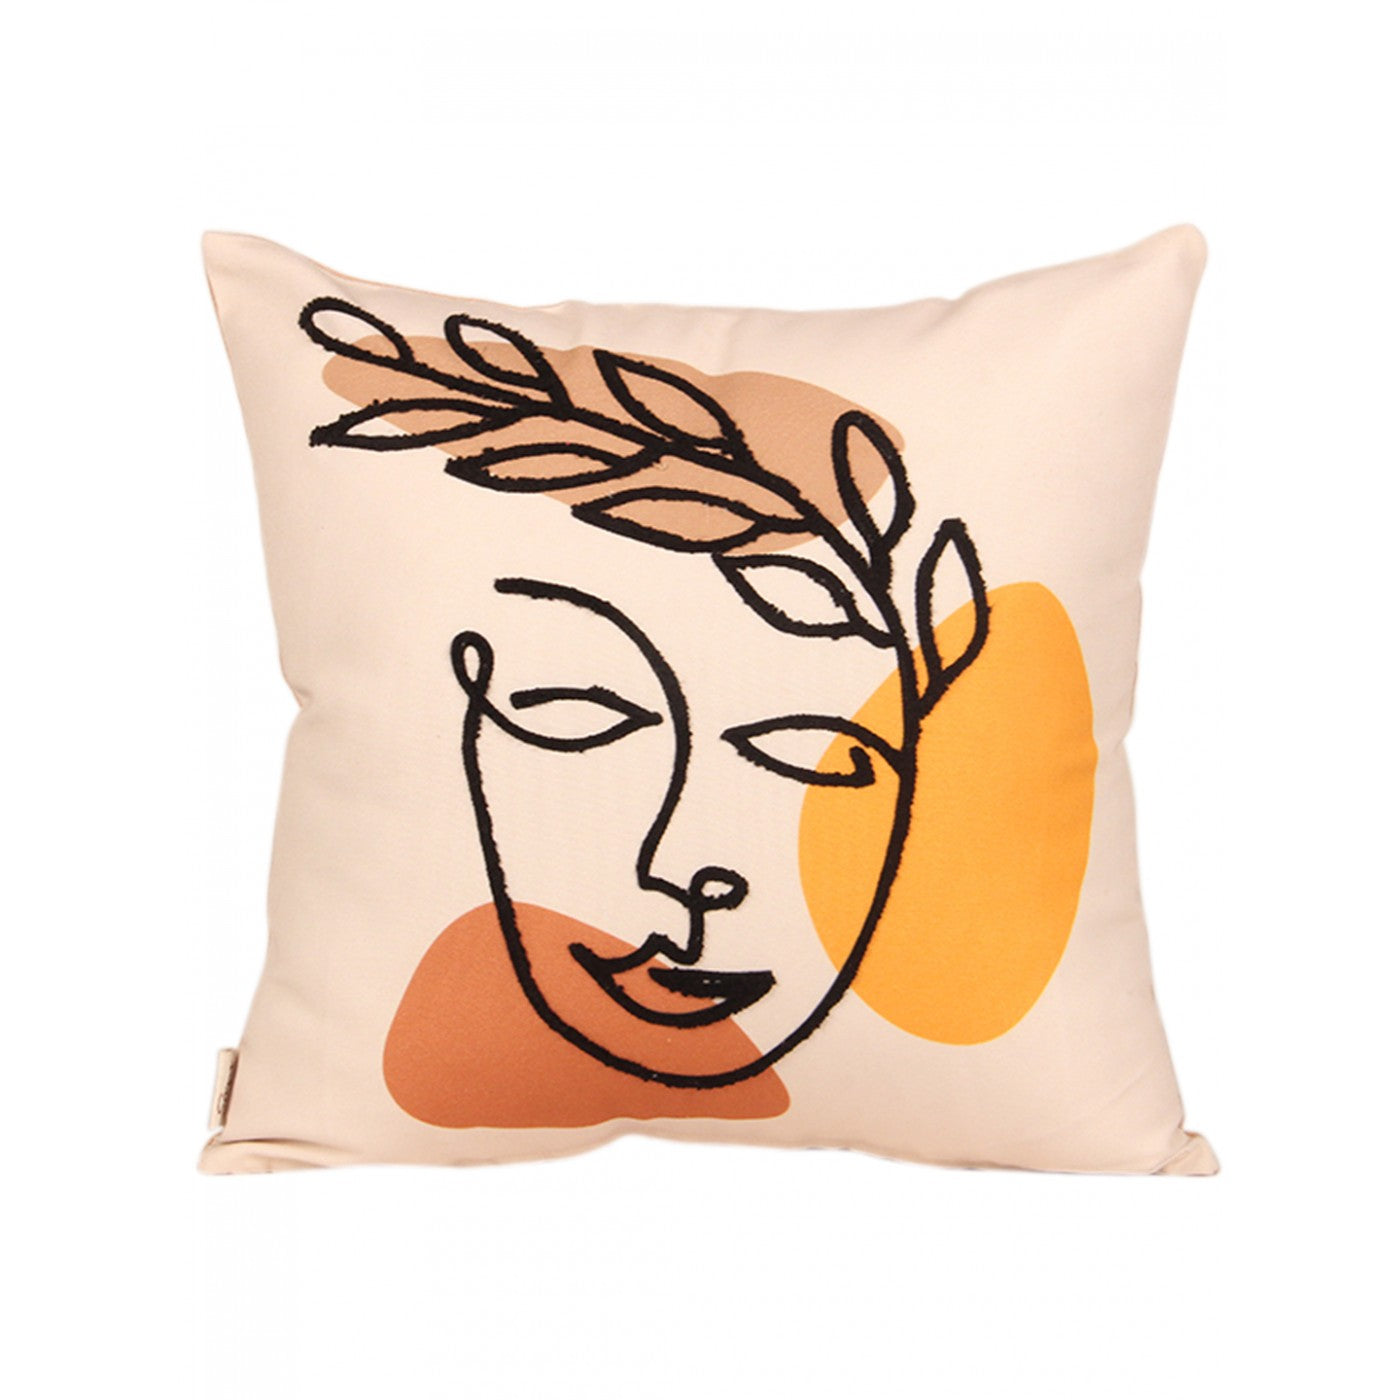 16x16 Inch Cushion Cover with Embroidered Face Art Print